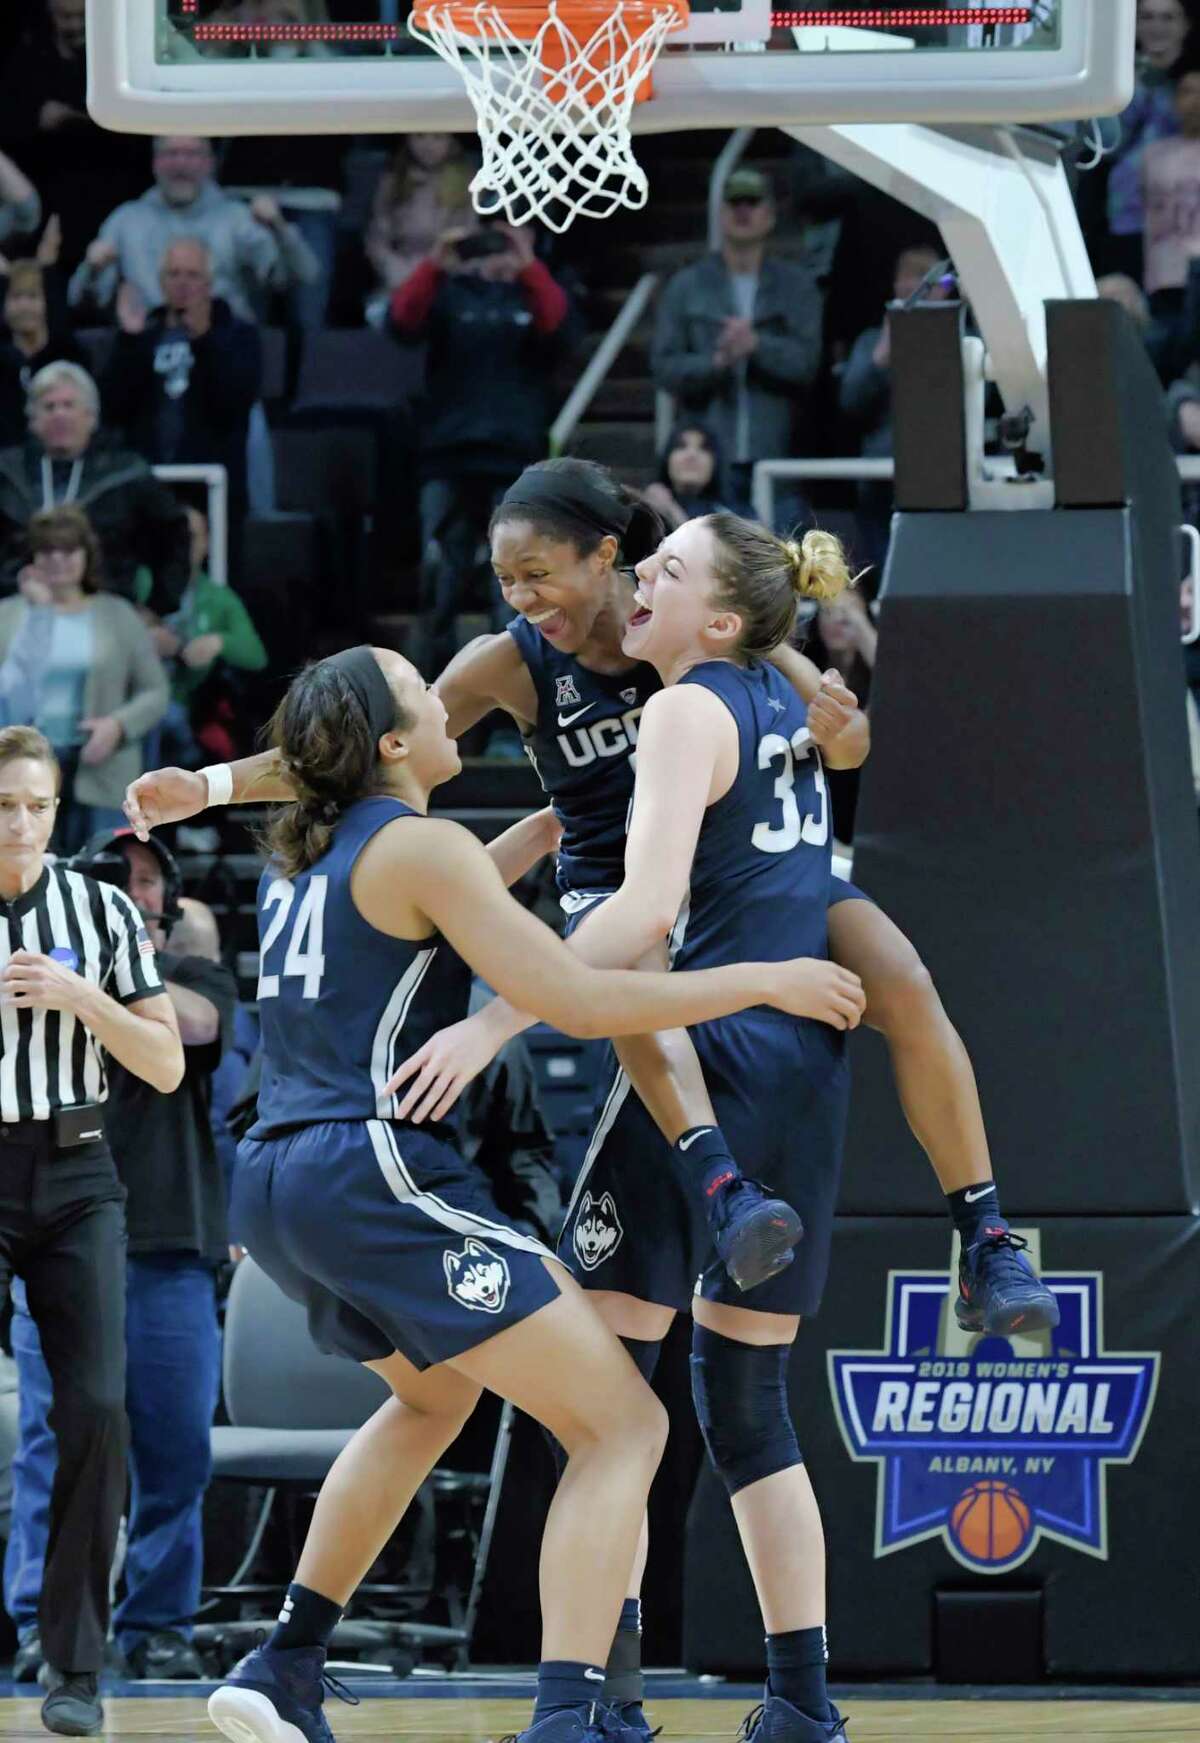 UConn's Napheesa Collier, left, Crystal Dangerfield, center, and Katie Lou Samuelson celebrate their win over Louisville in the final of the Albany Regional NCAA Women's Basketball Championship on Sunday, March 31, 2019, in Albany, N.Y. (Paul Buckowski/Times Union)